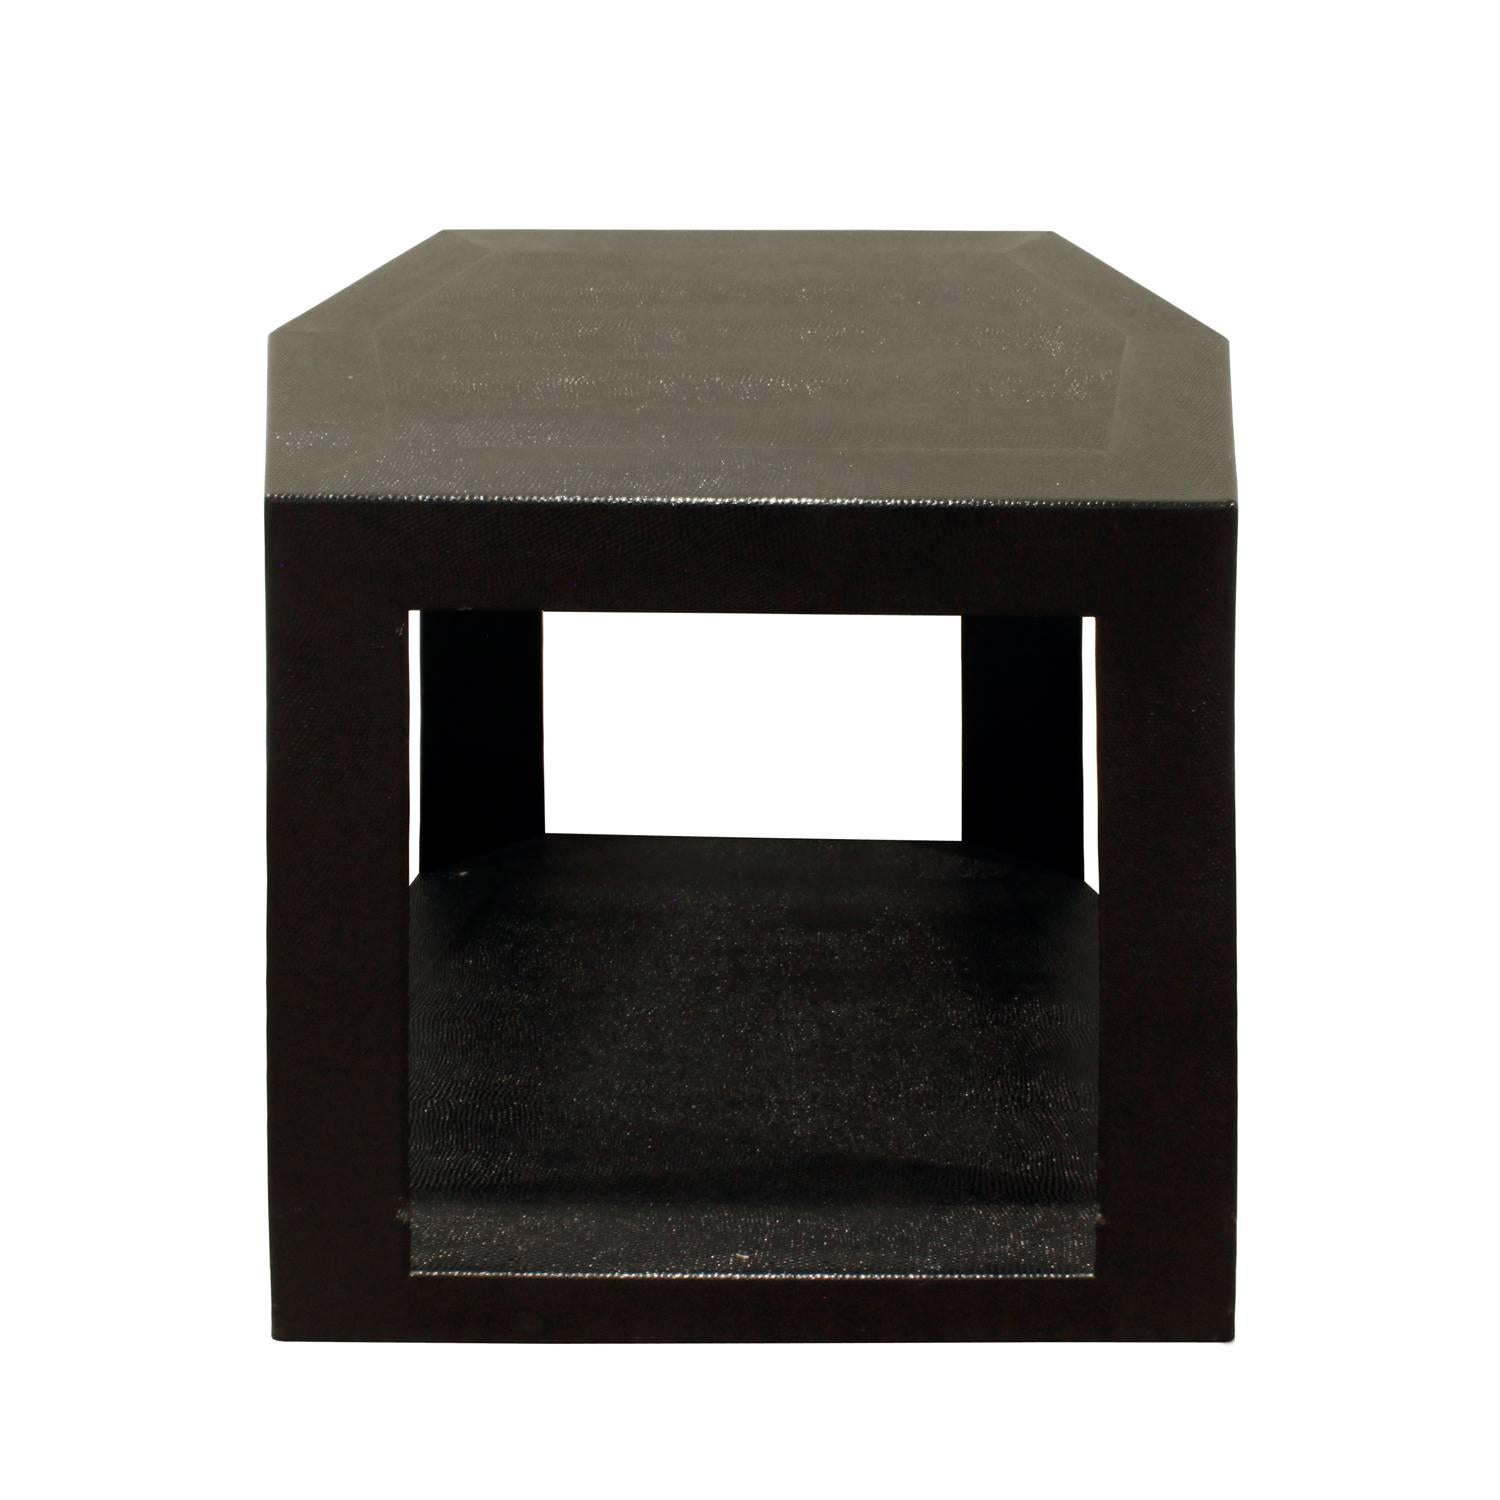 Hexagonal side table covered in black embossed reptile leather by Karl Springer, American, 1986. Label reads 